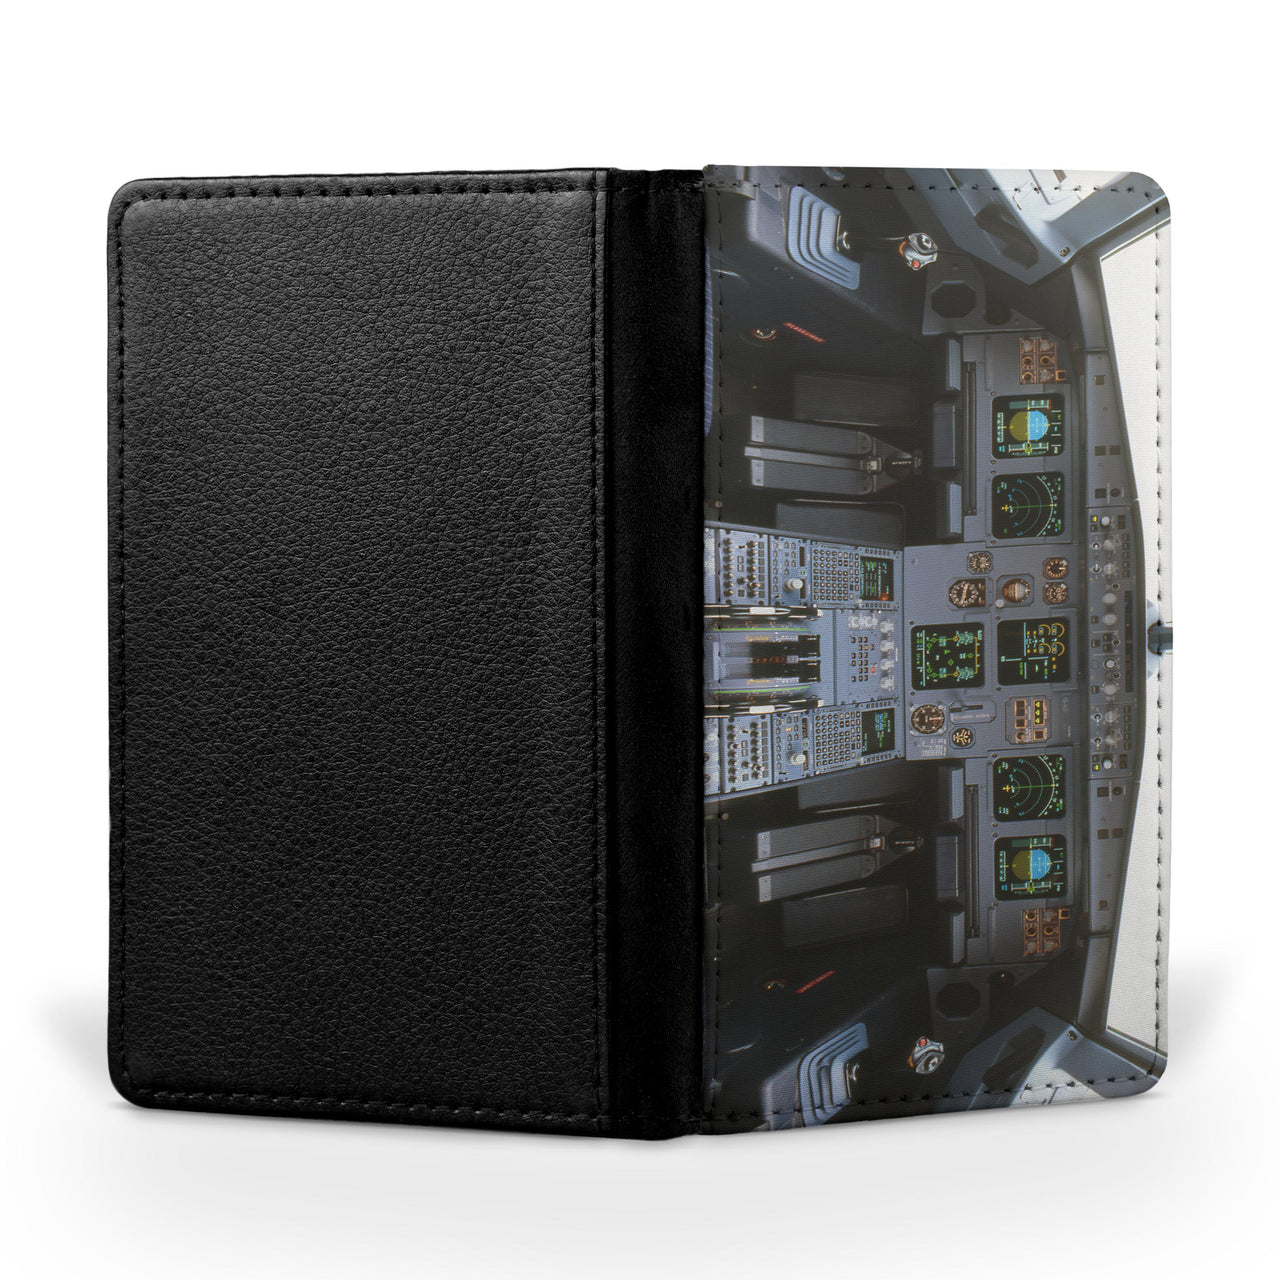 Airbus A320 Cockpit Wide Printed Passport & Travel Cases